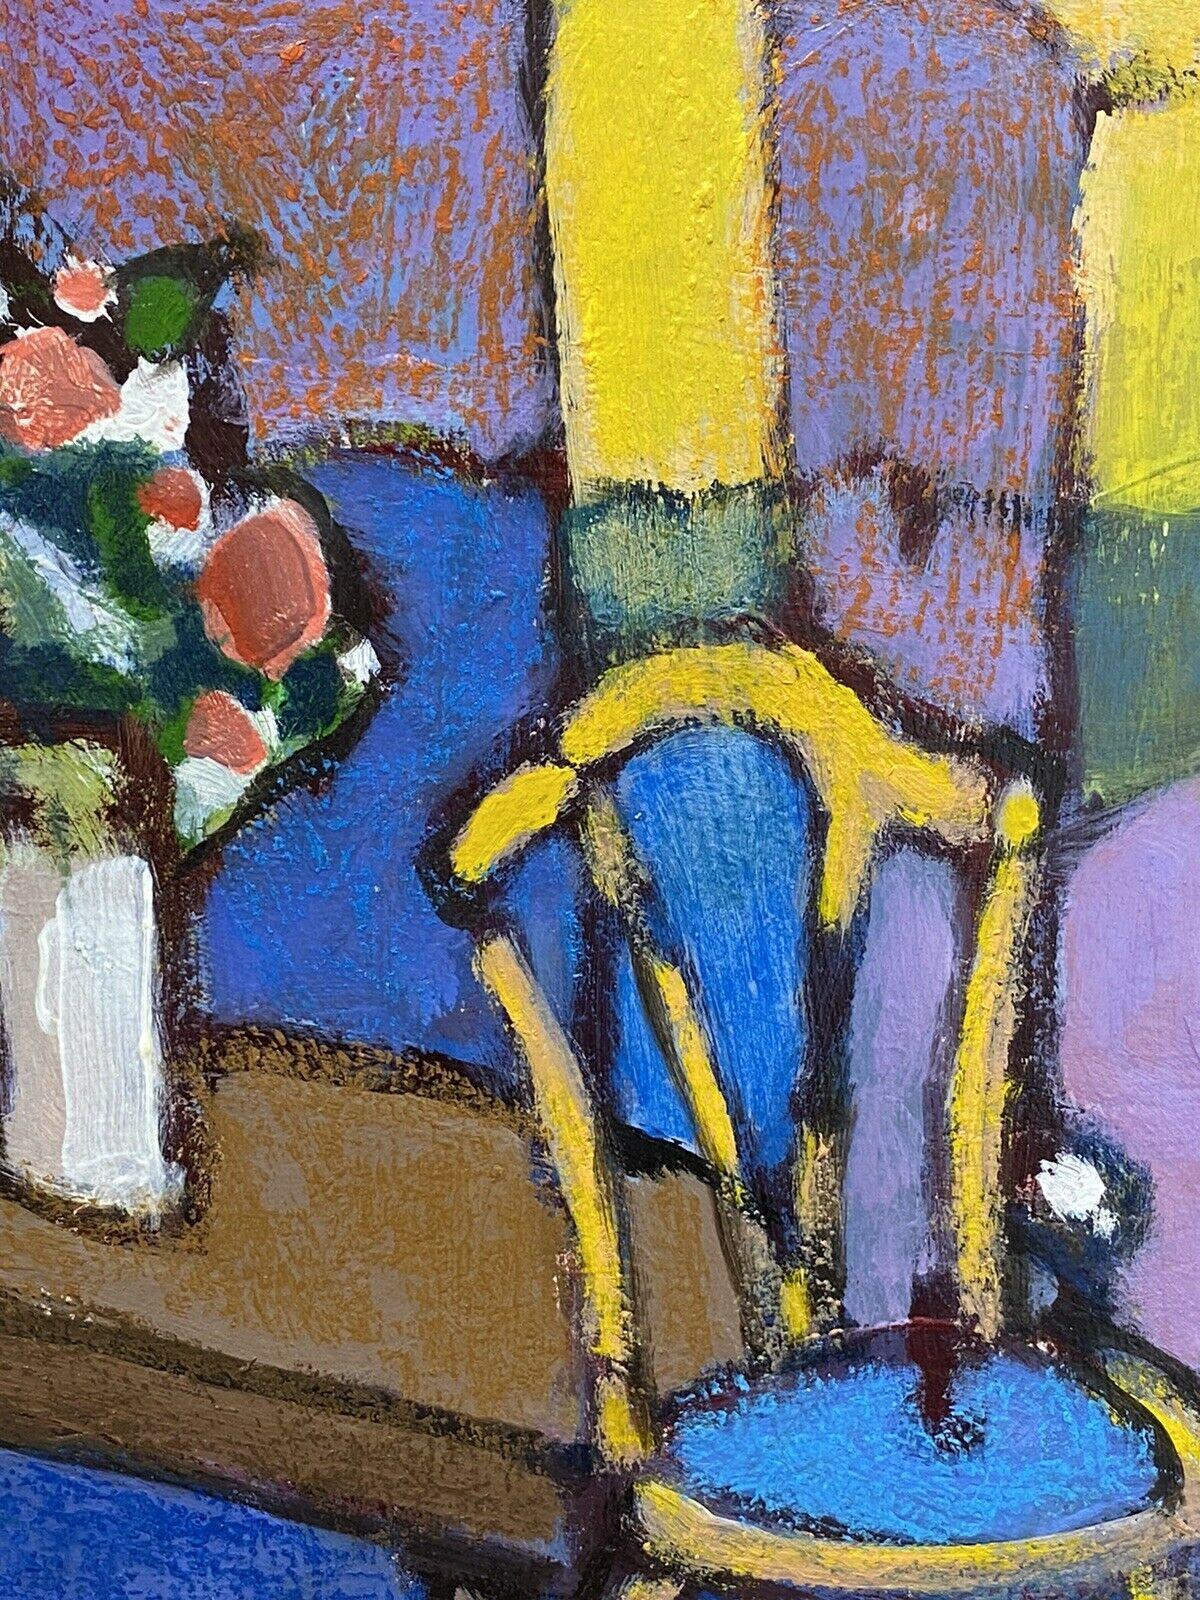 Artist/ School: Rene Leroy (French b. 1932)

Title: Abstract/ Cubist Composition Interior Scene with Flowers

Medium: oil painting on canvas

Size: painting: 10.75 x 8.75 inches

Provenance: all the paintings we have for sale by this artist,